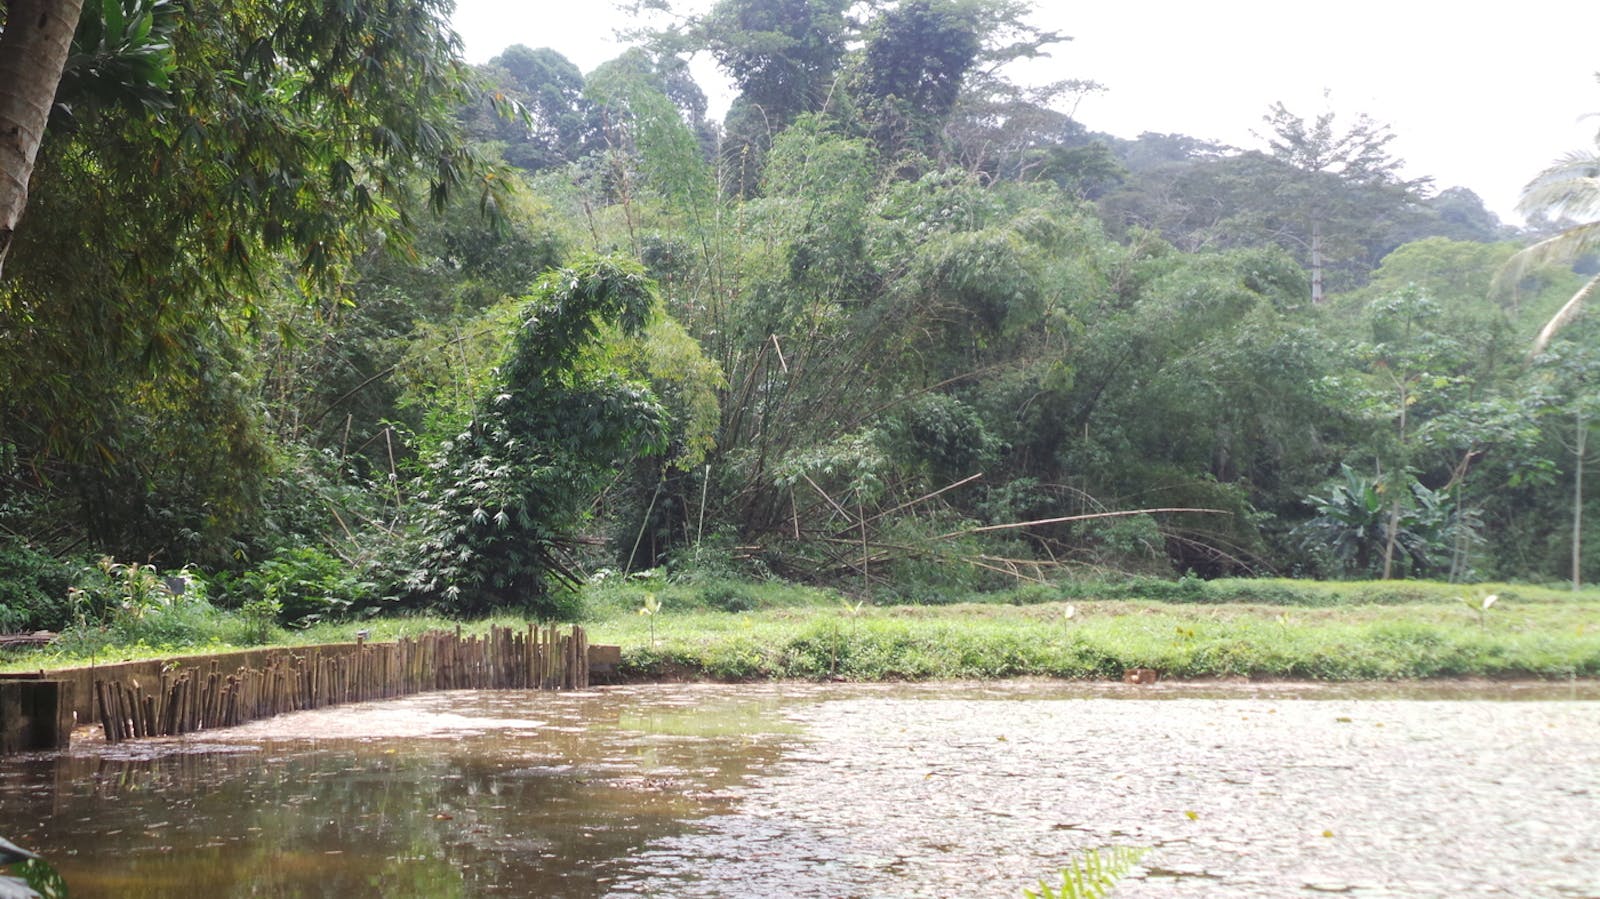 Eastern Guinean Forests